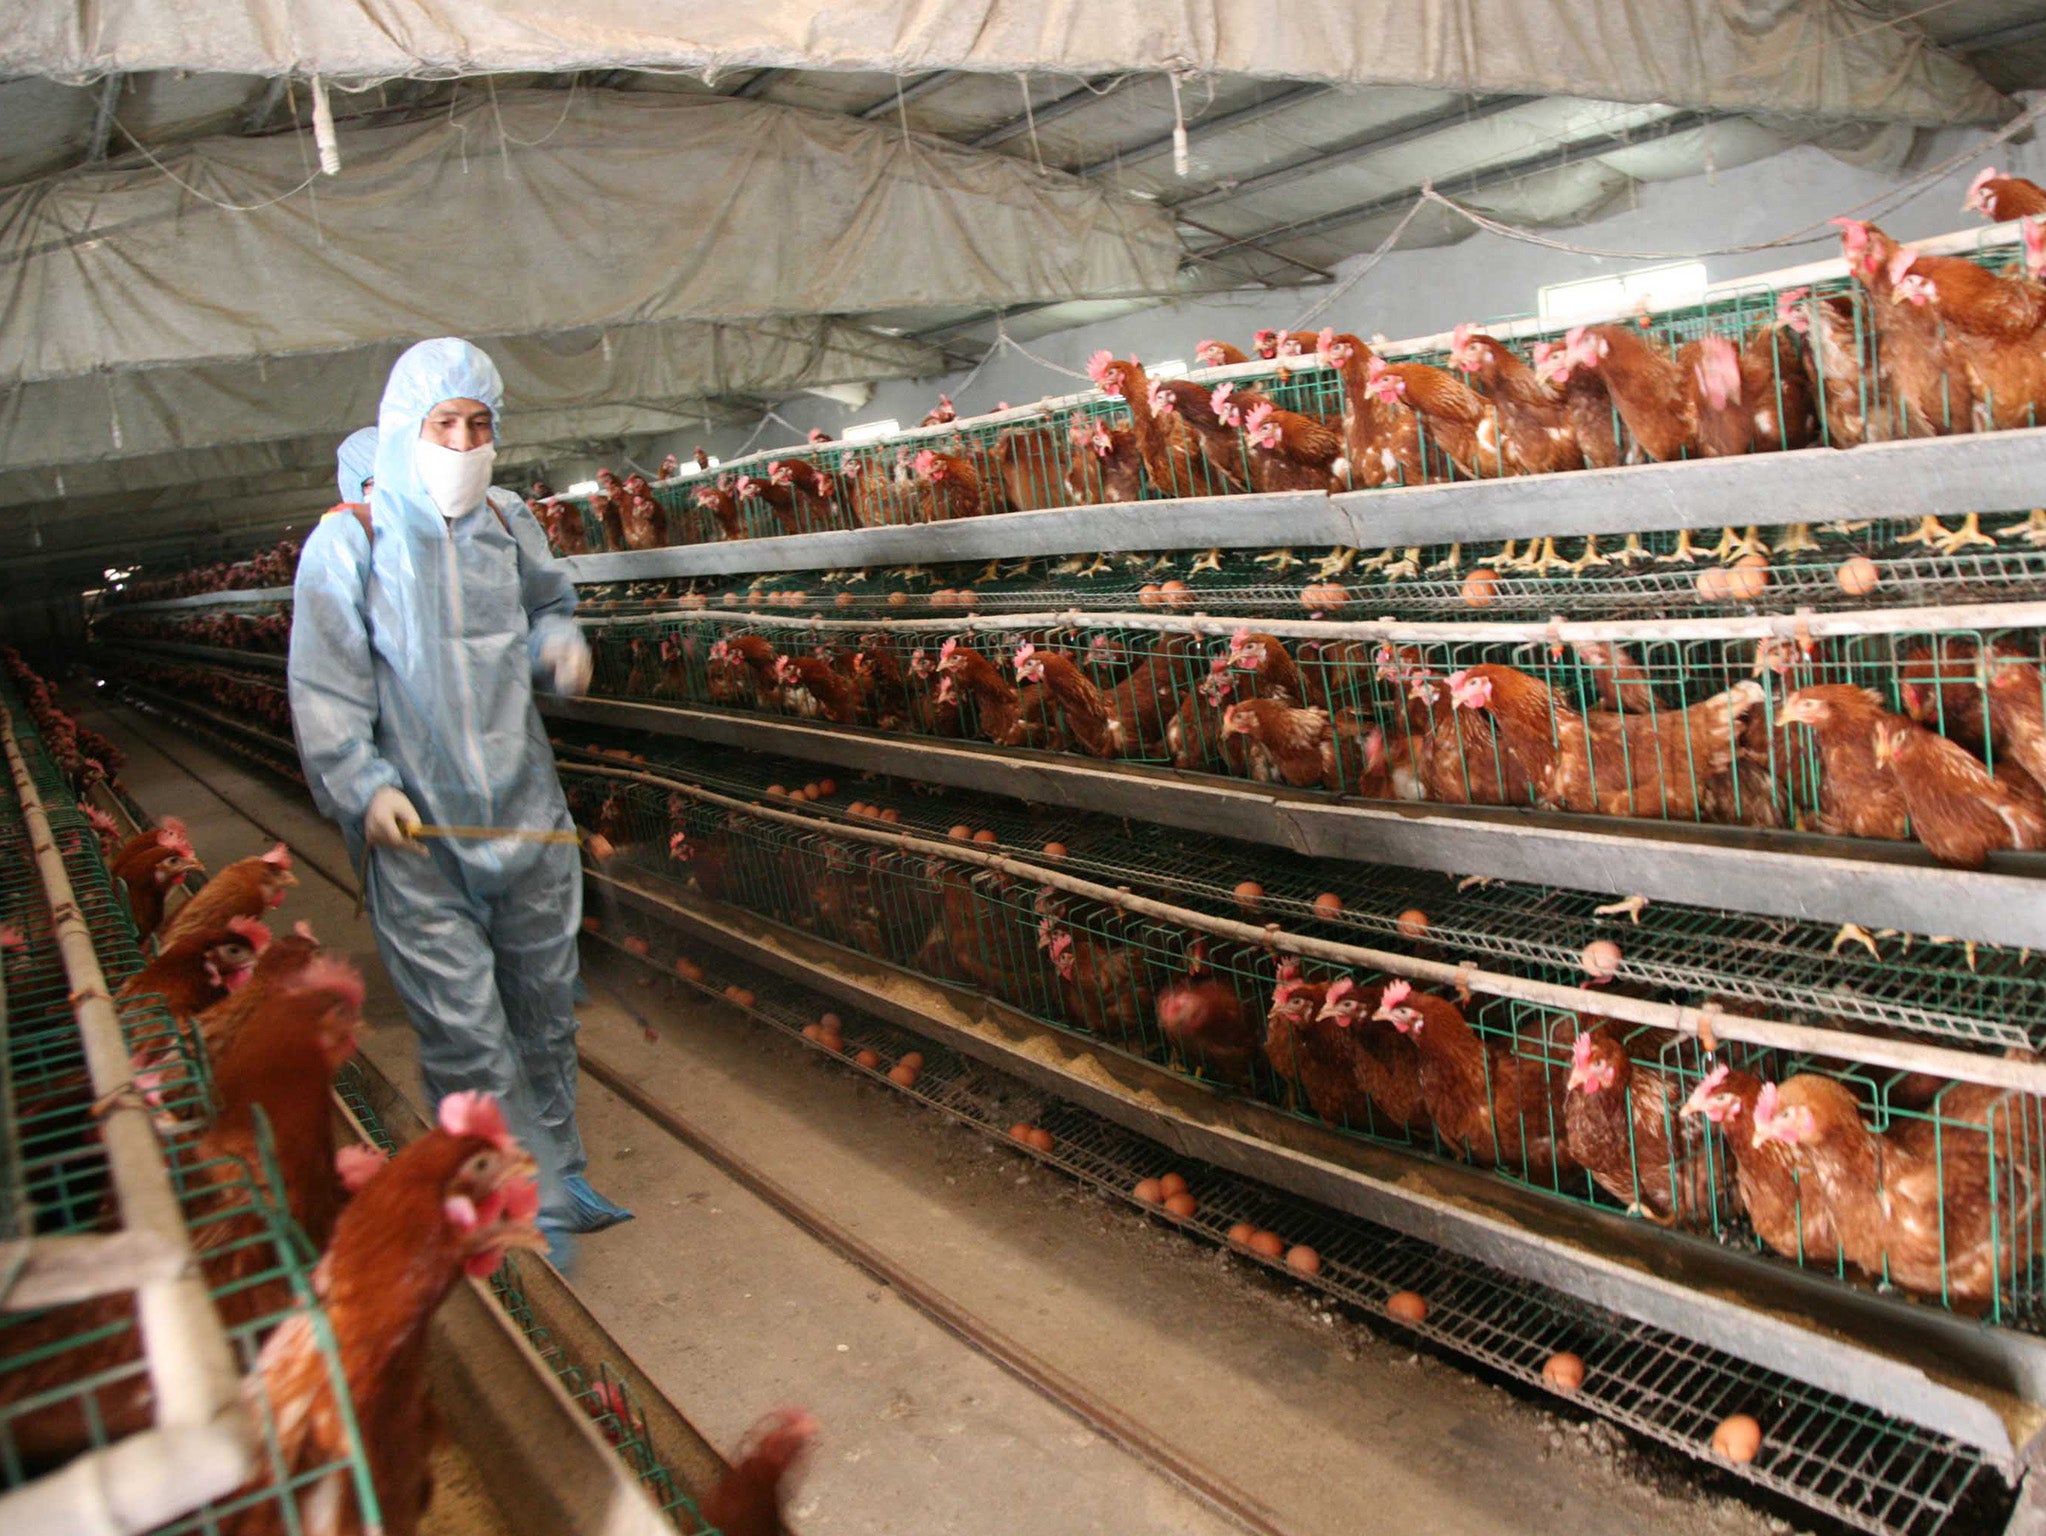 The chicken-farming industry will set their own welfare codes from April 27